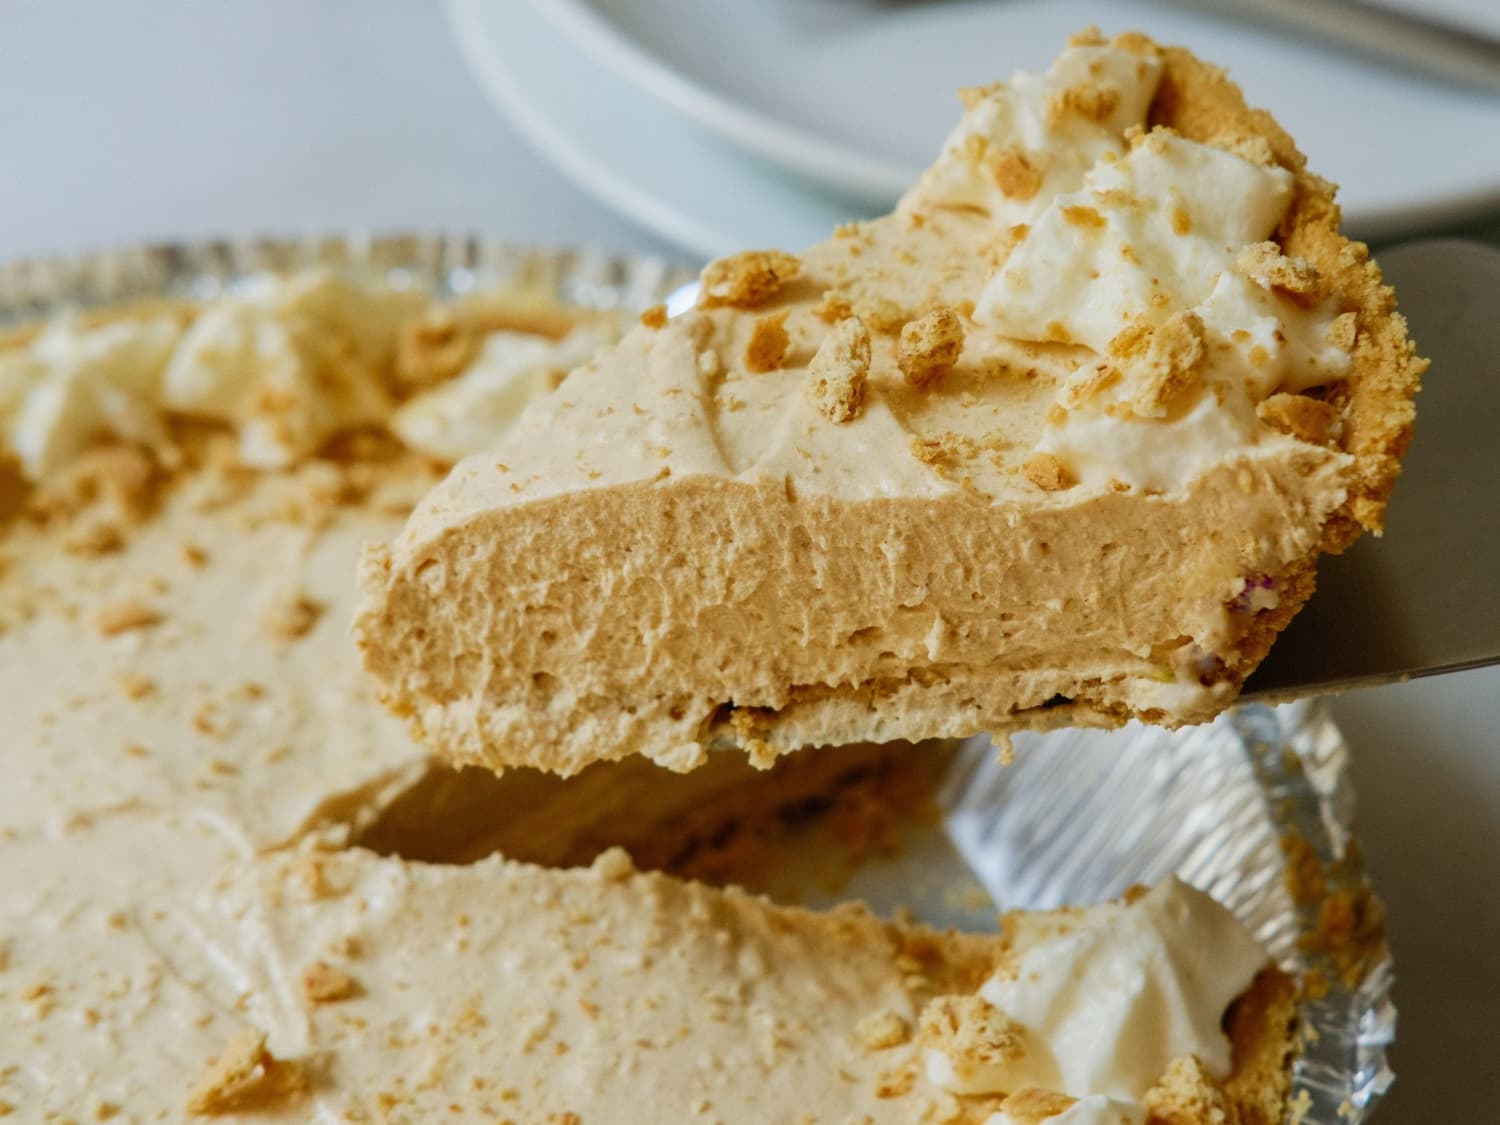 I Tried Dolly Parton’s Famous No-Bake Peanut Butter Pie, and It’s So Easy, I’ll Be Making It Every Weekend